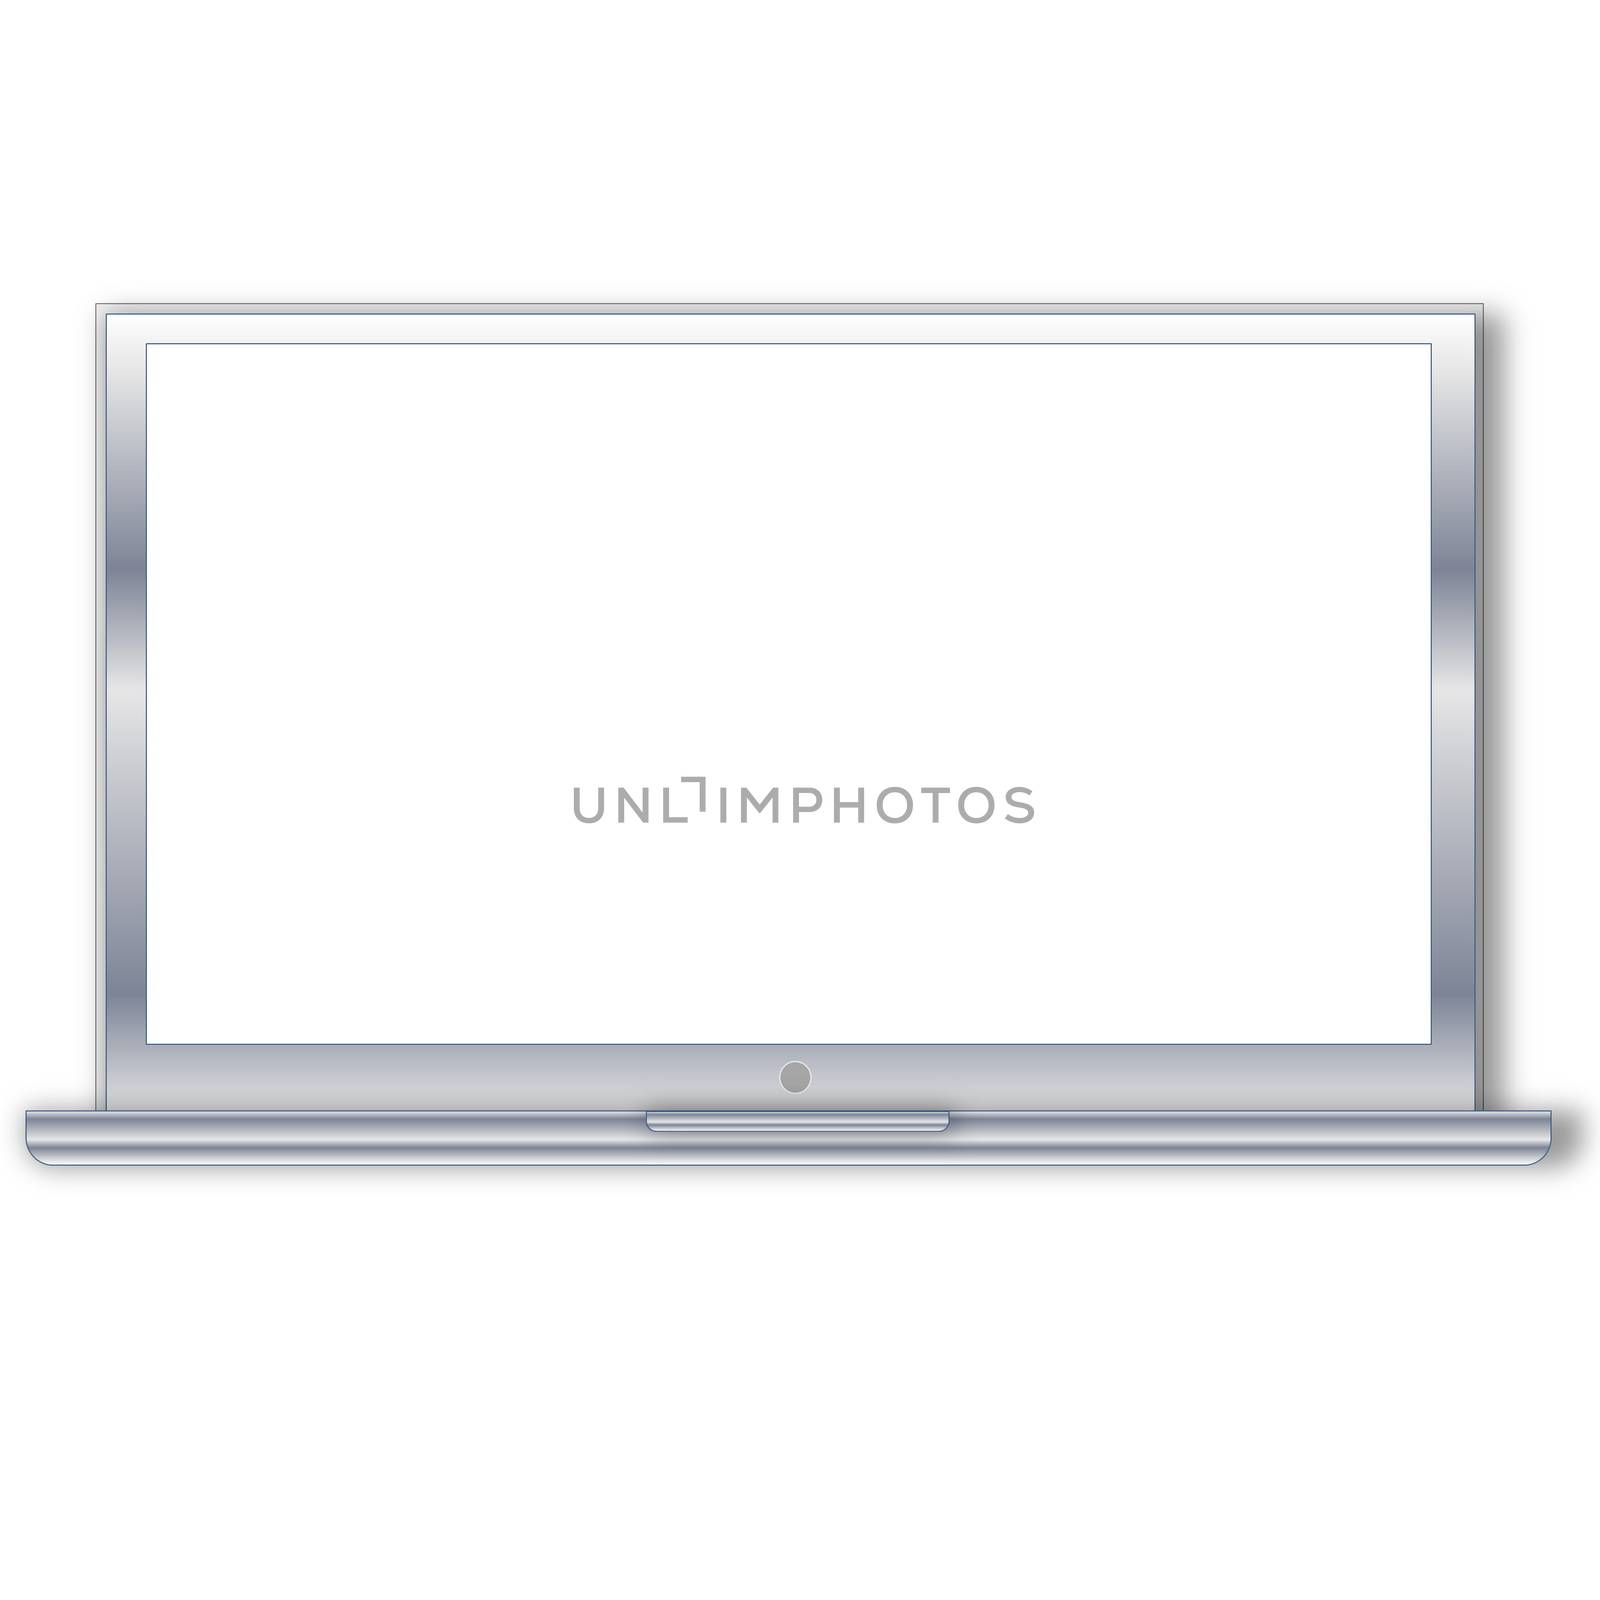 Single grey laptop isolated in white background